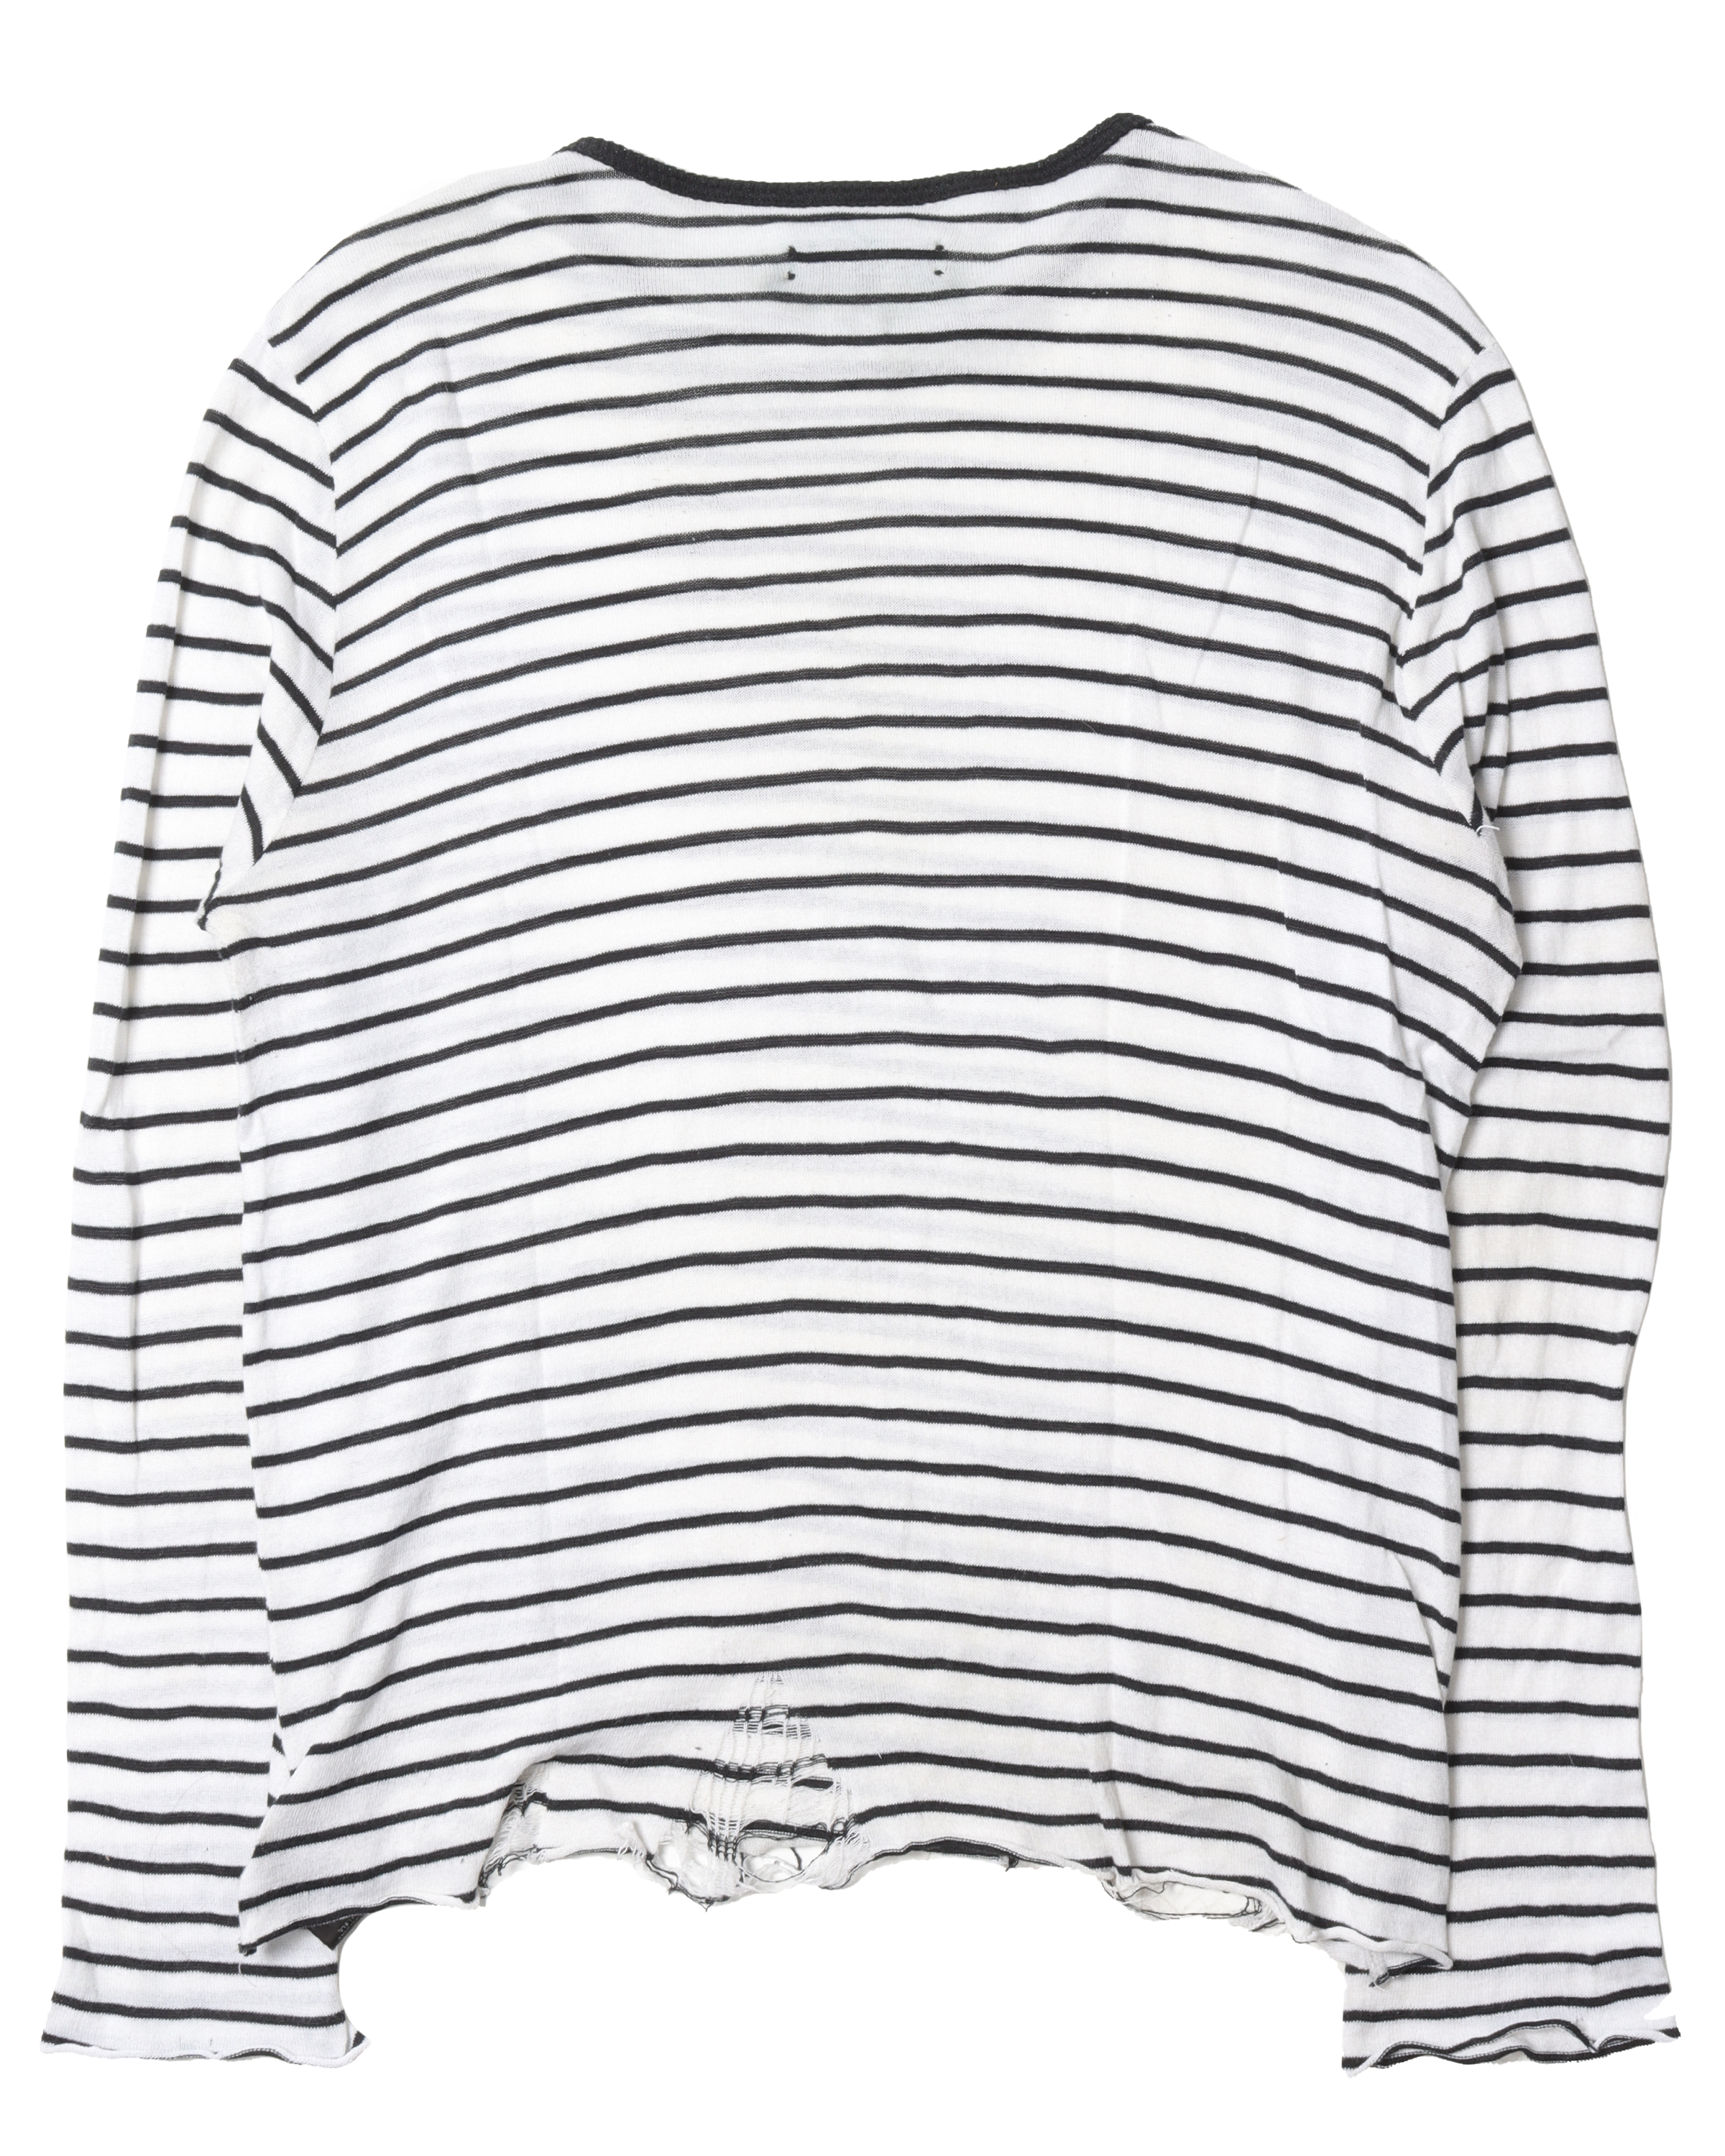 Distressed Striped Long Sleeve Shirt